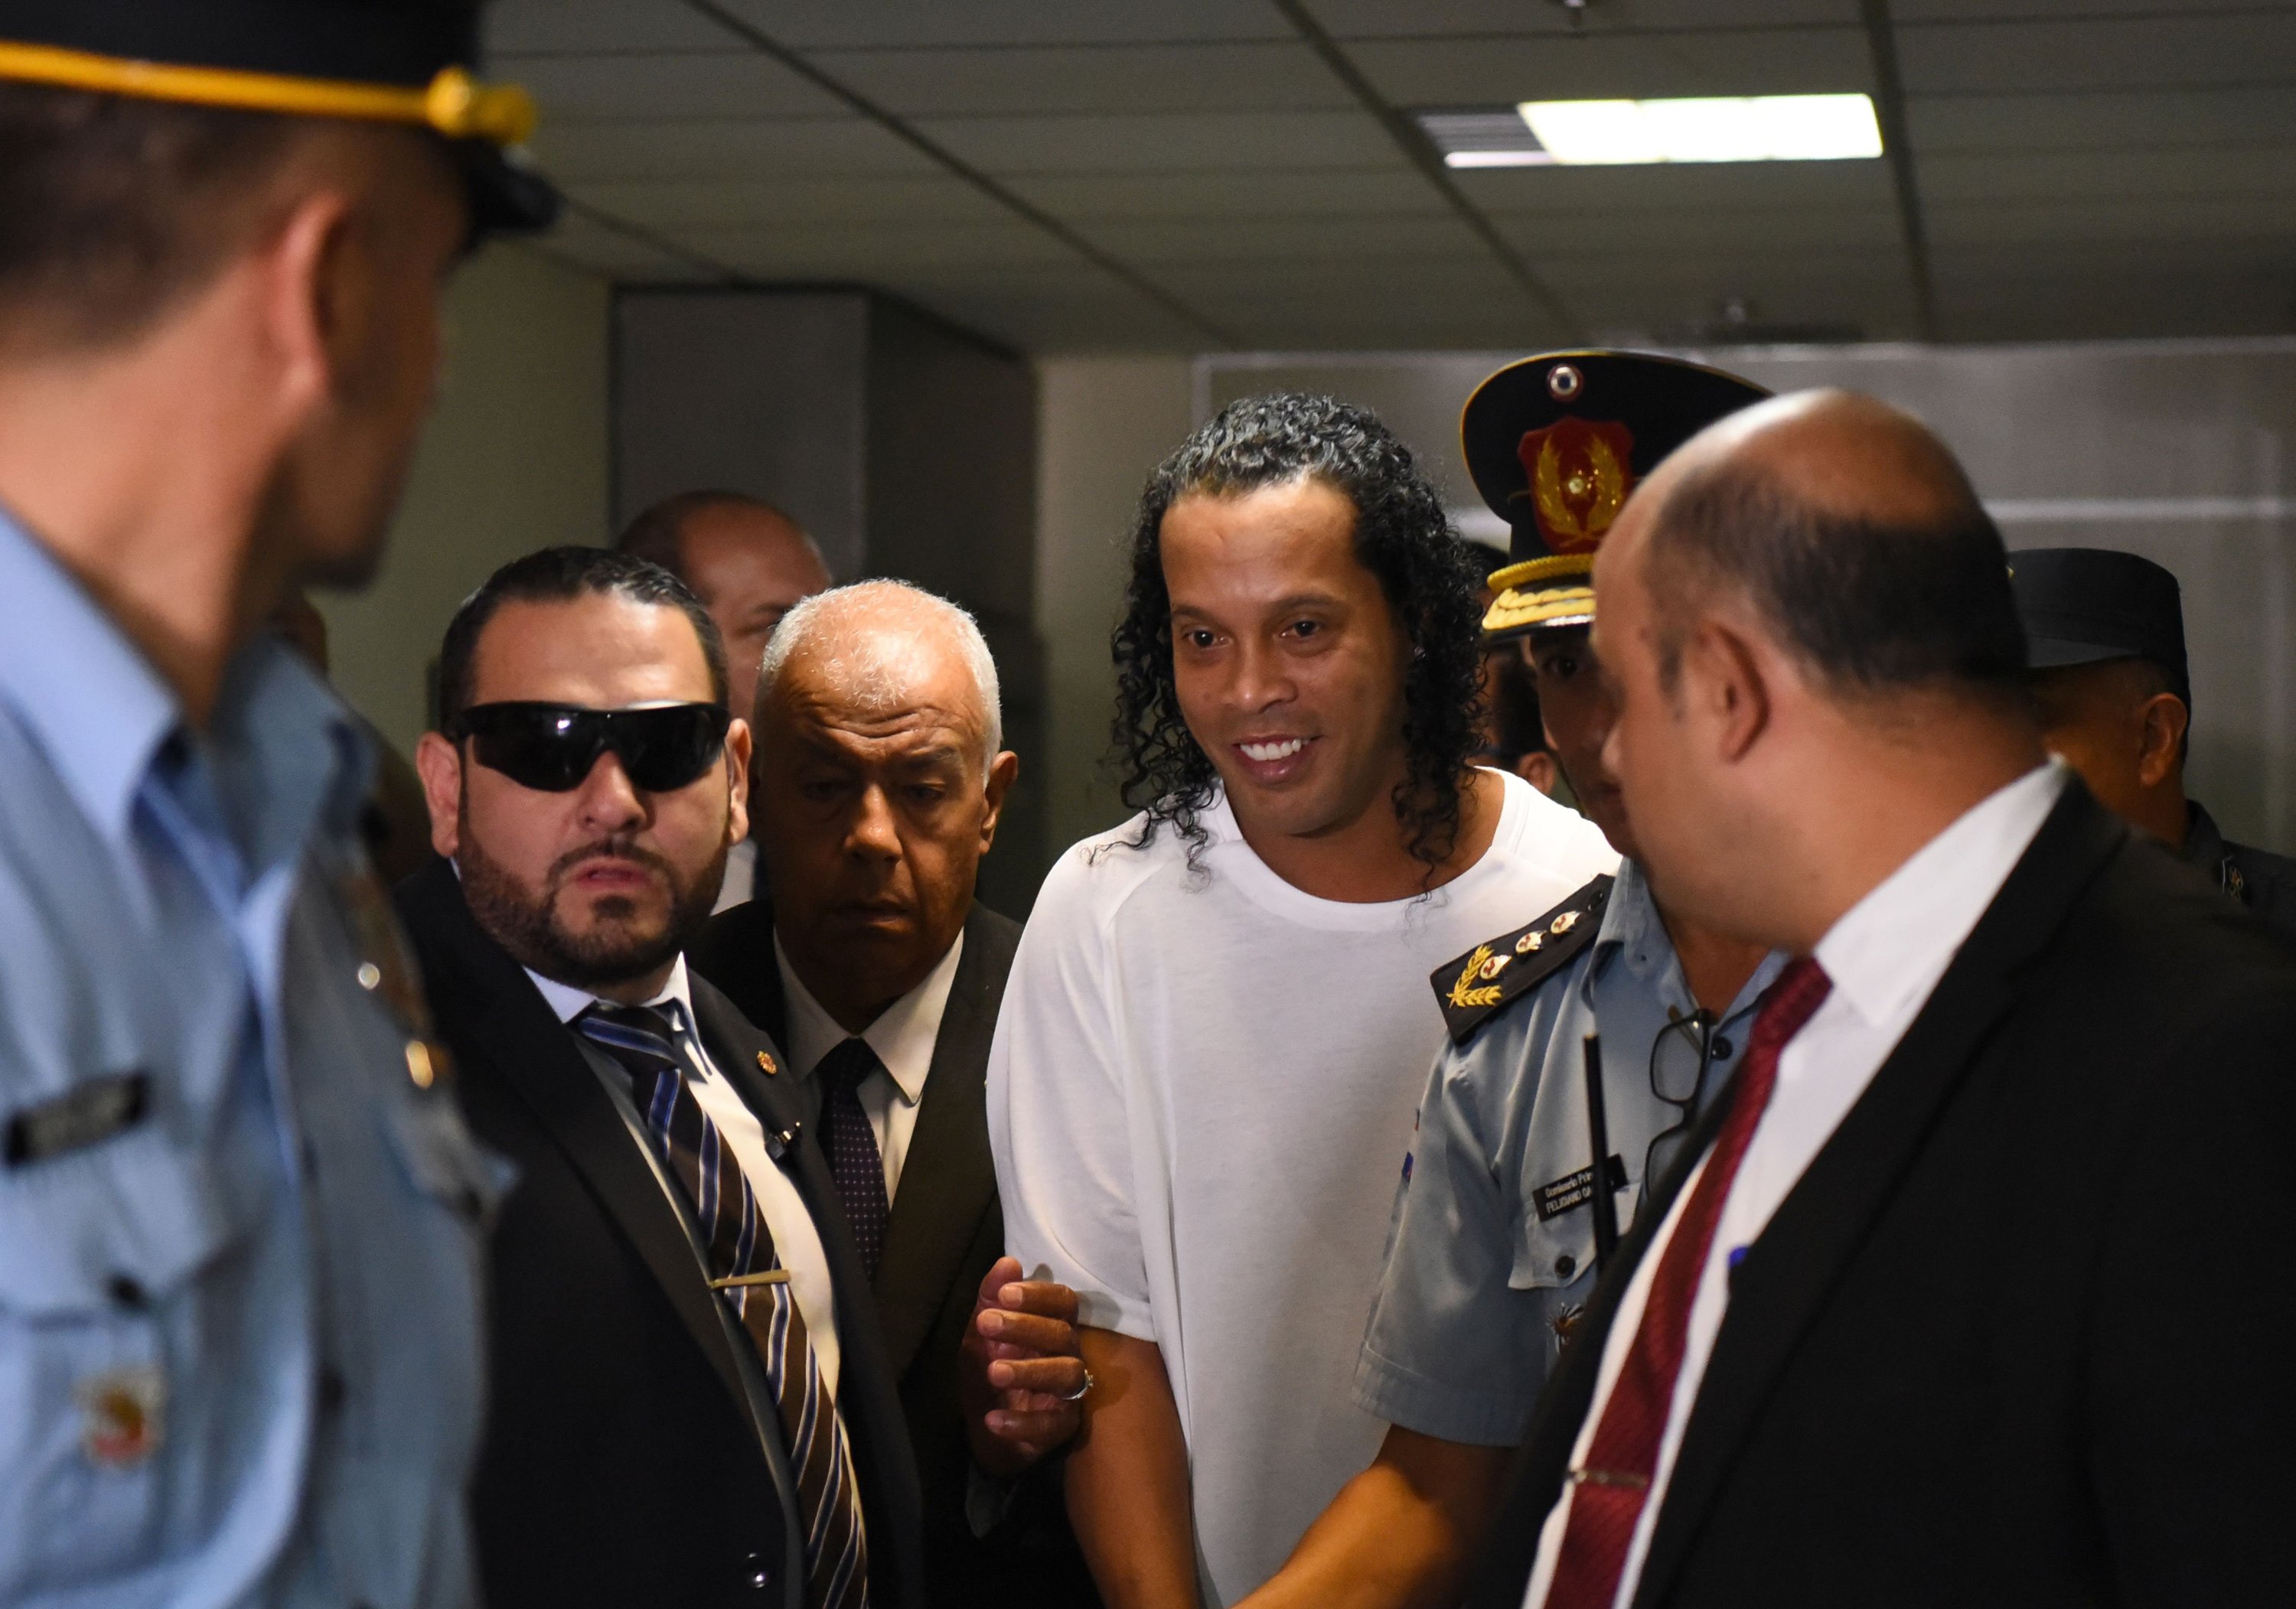 Paraguay court releases Ronaldinho to house arrest | Daily Sabah